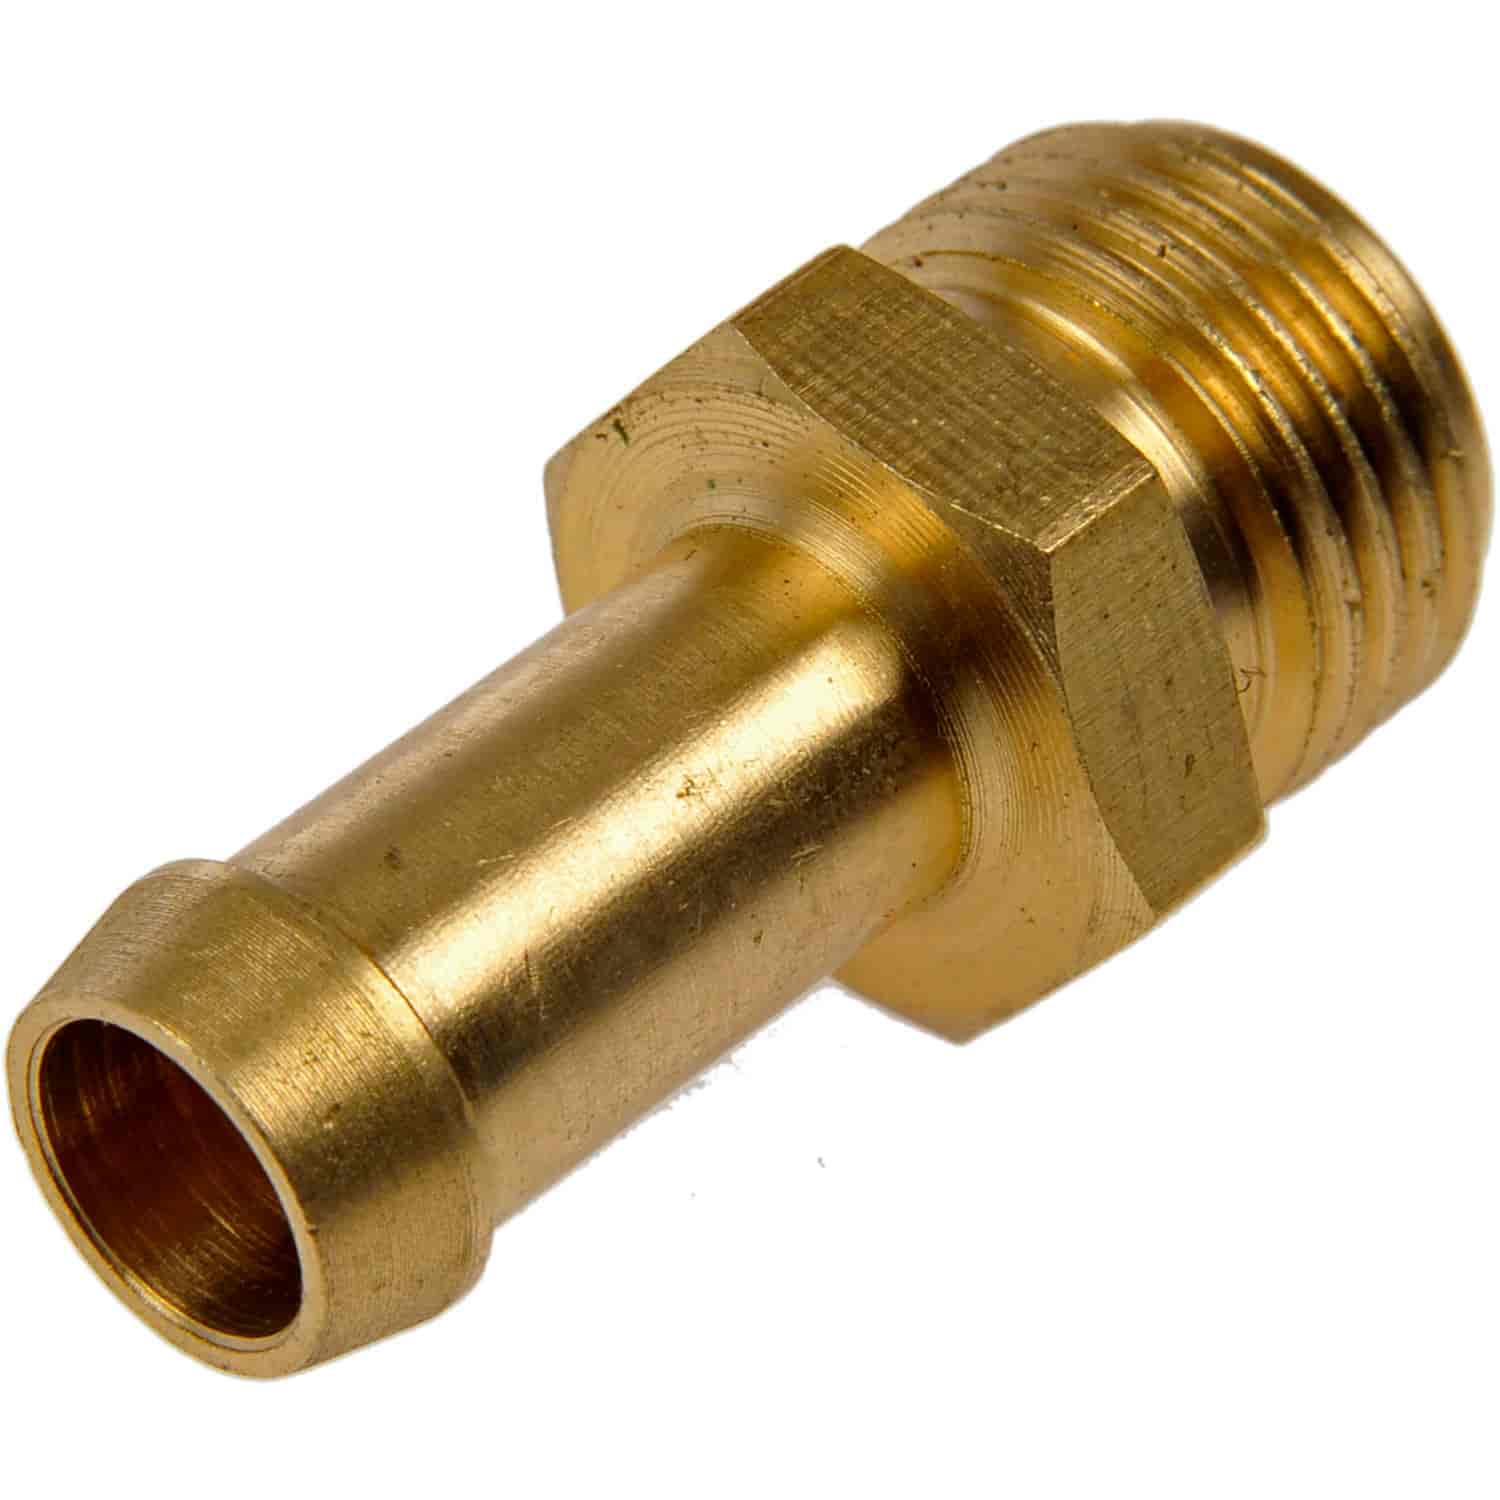 Fuel Hose Inverted Flare Fitting Male Connector 3/8" x 3/8" Tube